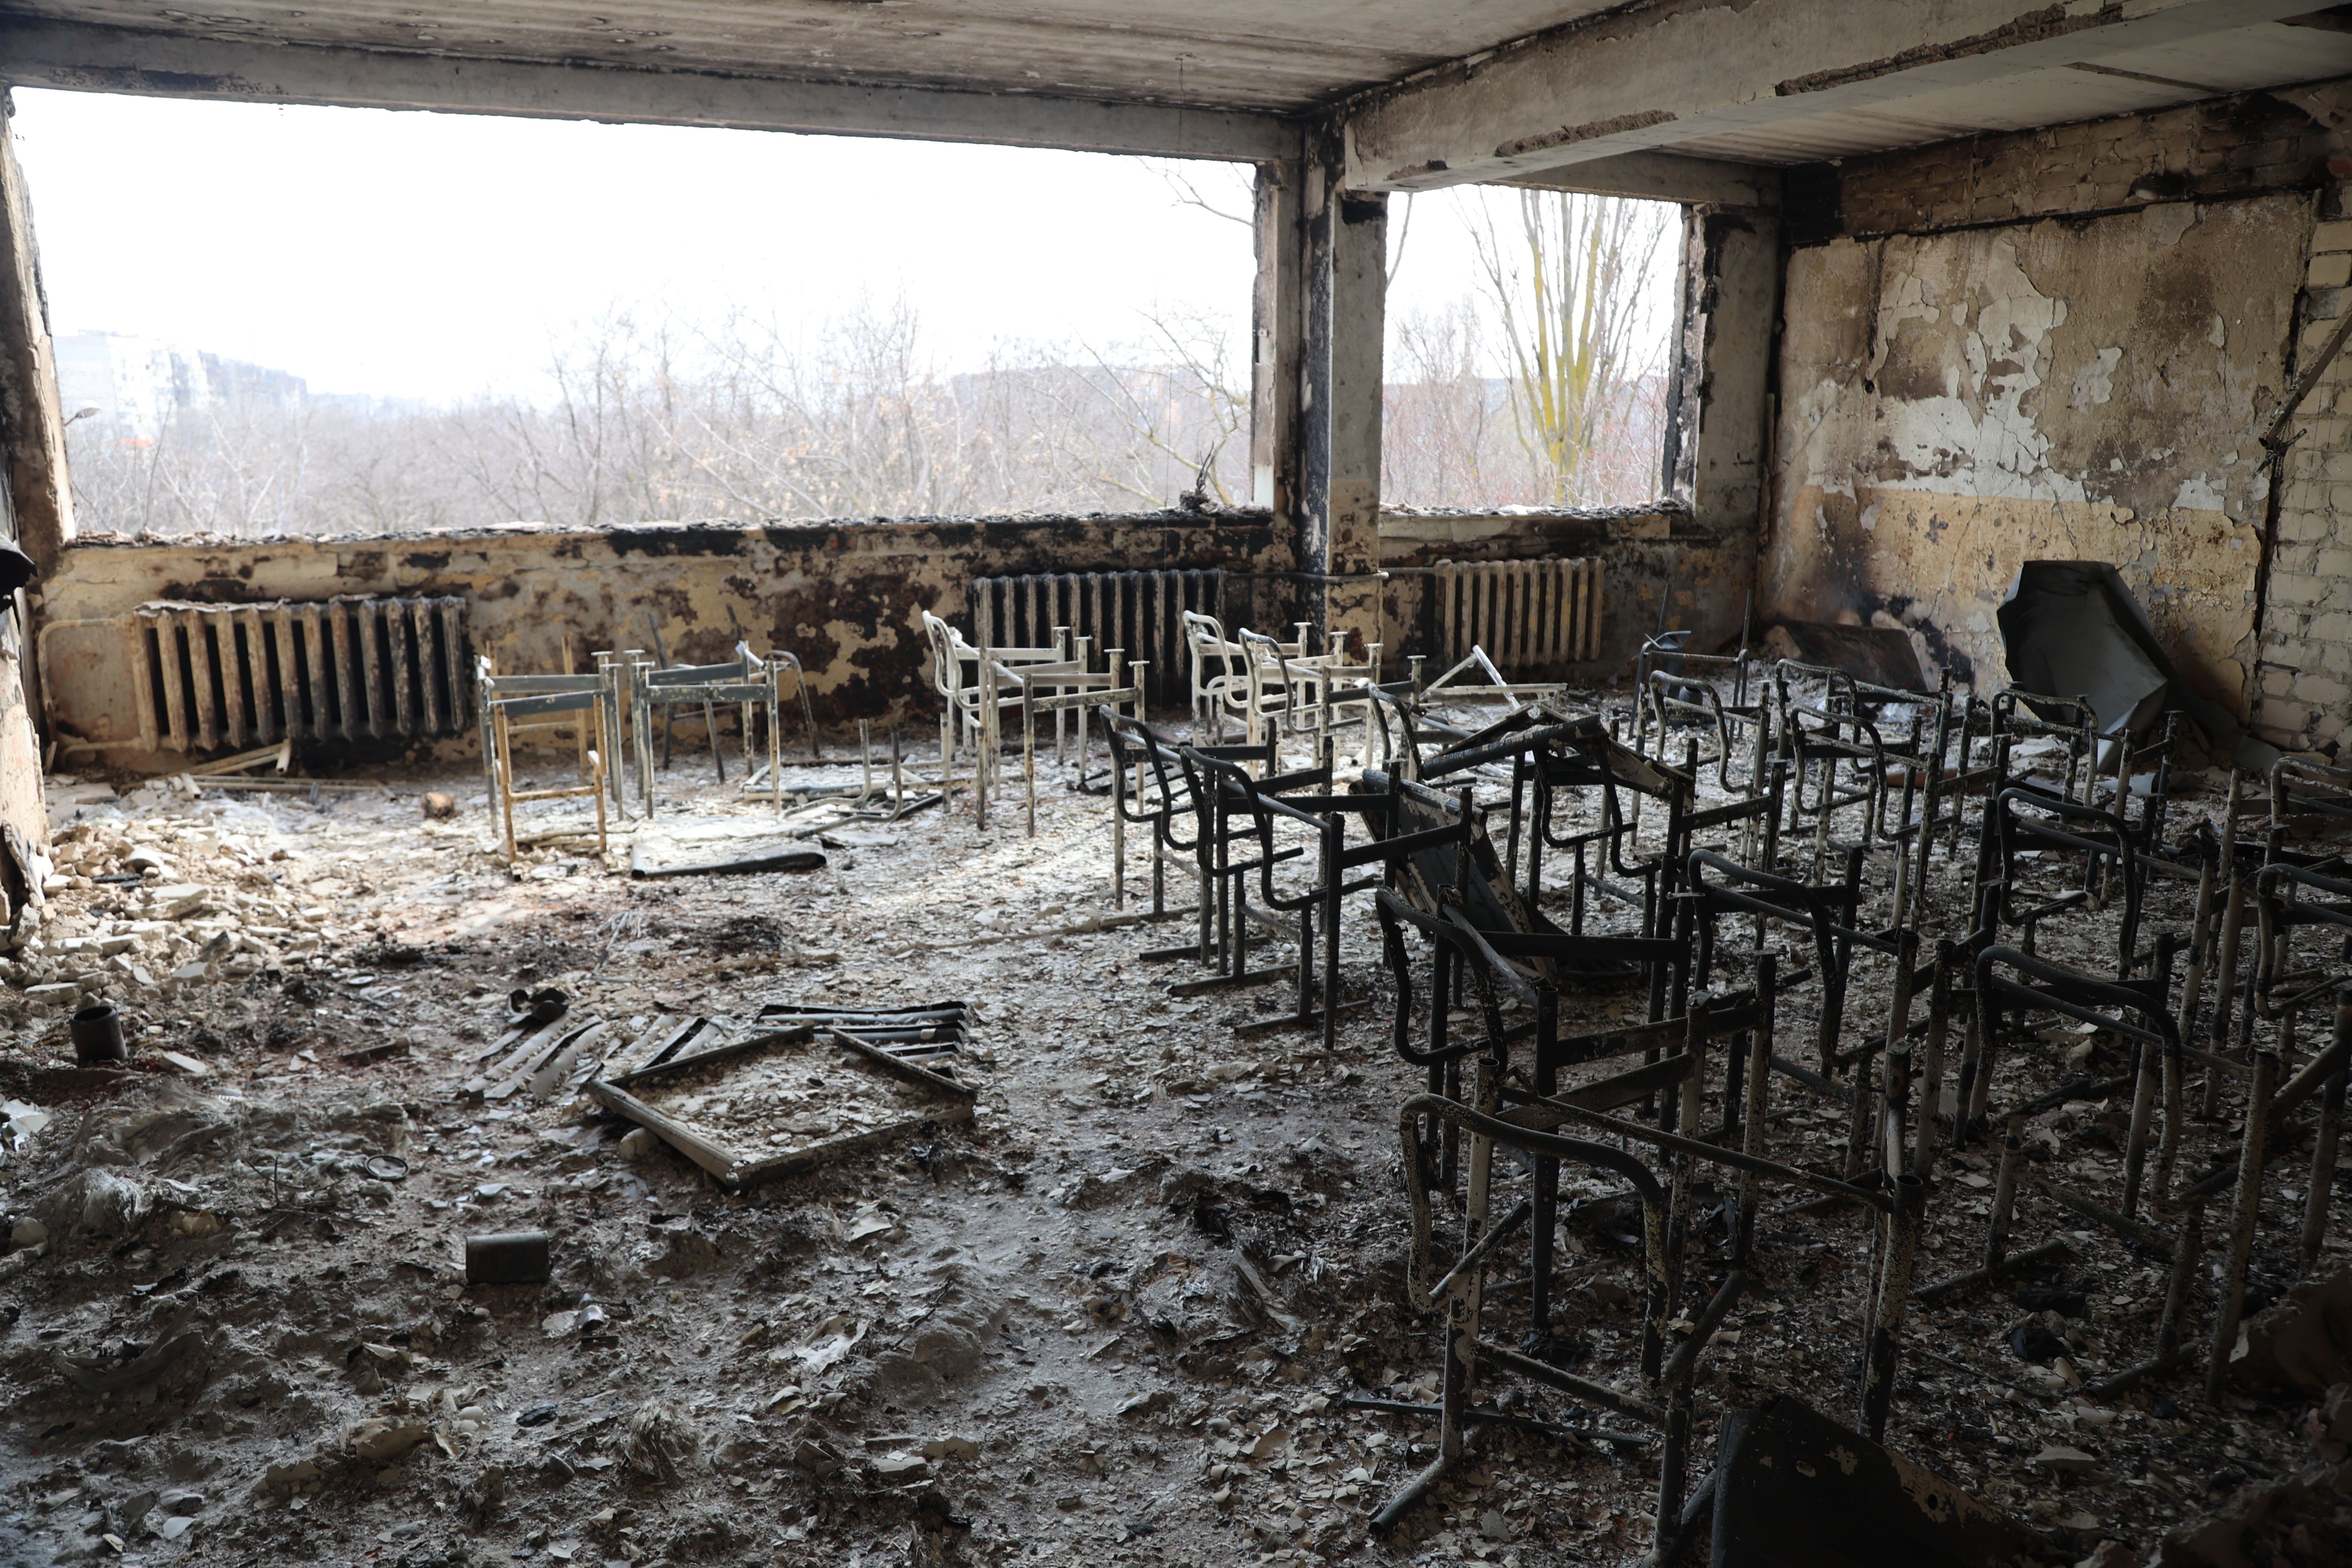     View of a school damaged after a shelling on March 29 in the Ukrainian city of Mariupol, controlled by the Russian military and pro-Russian separatists.